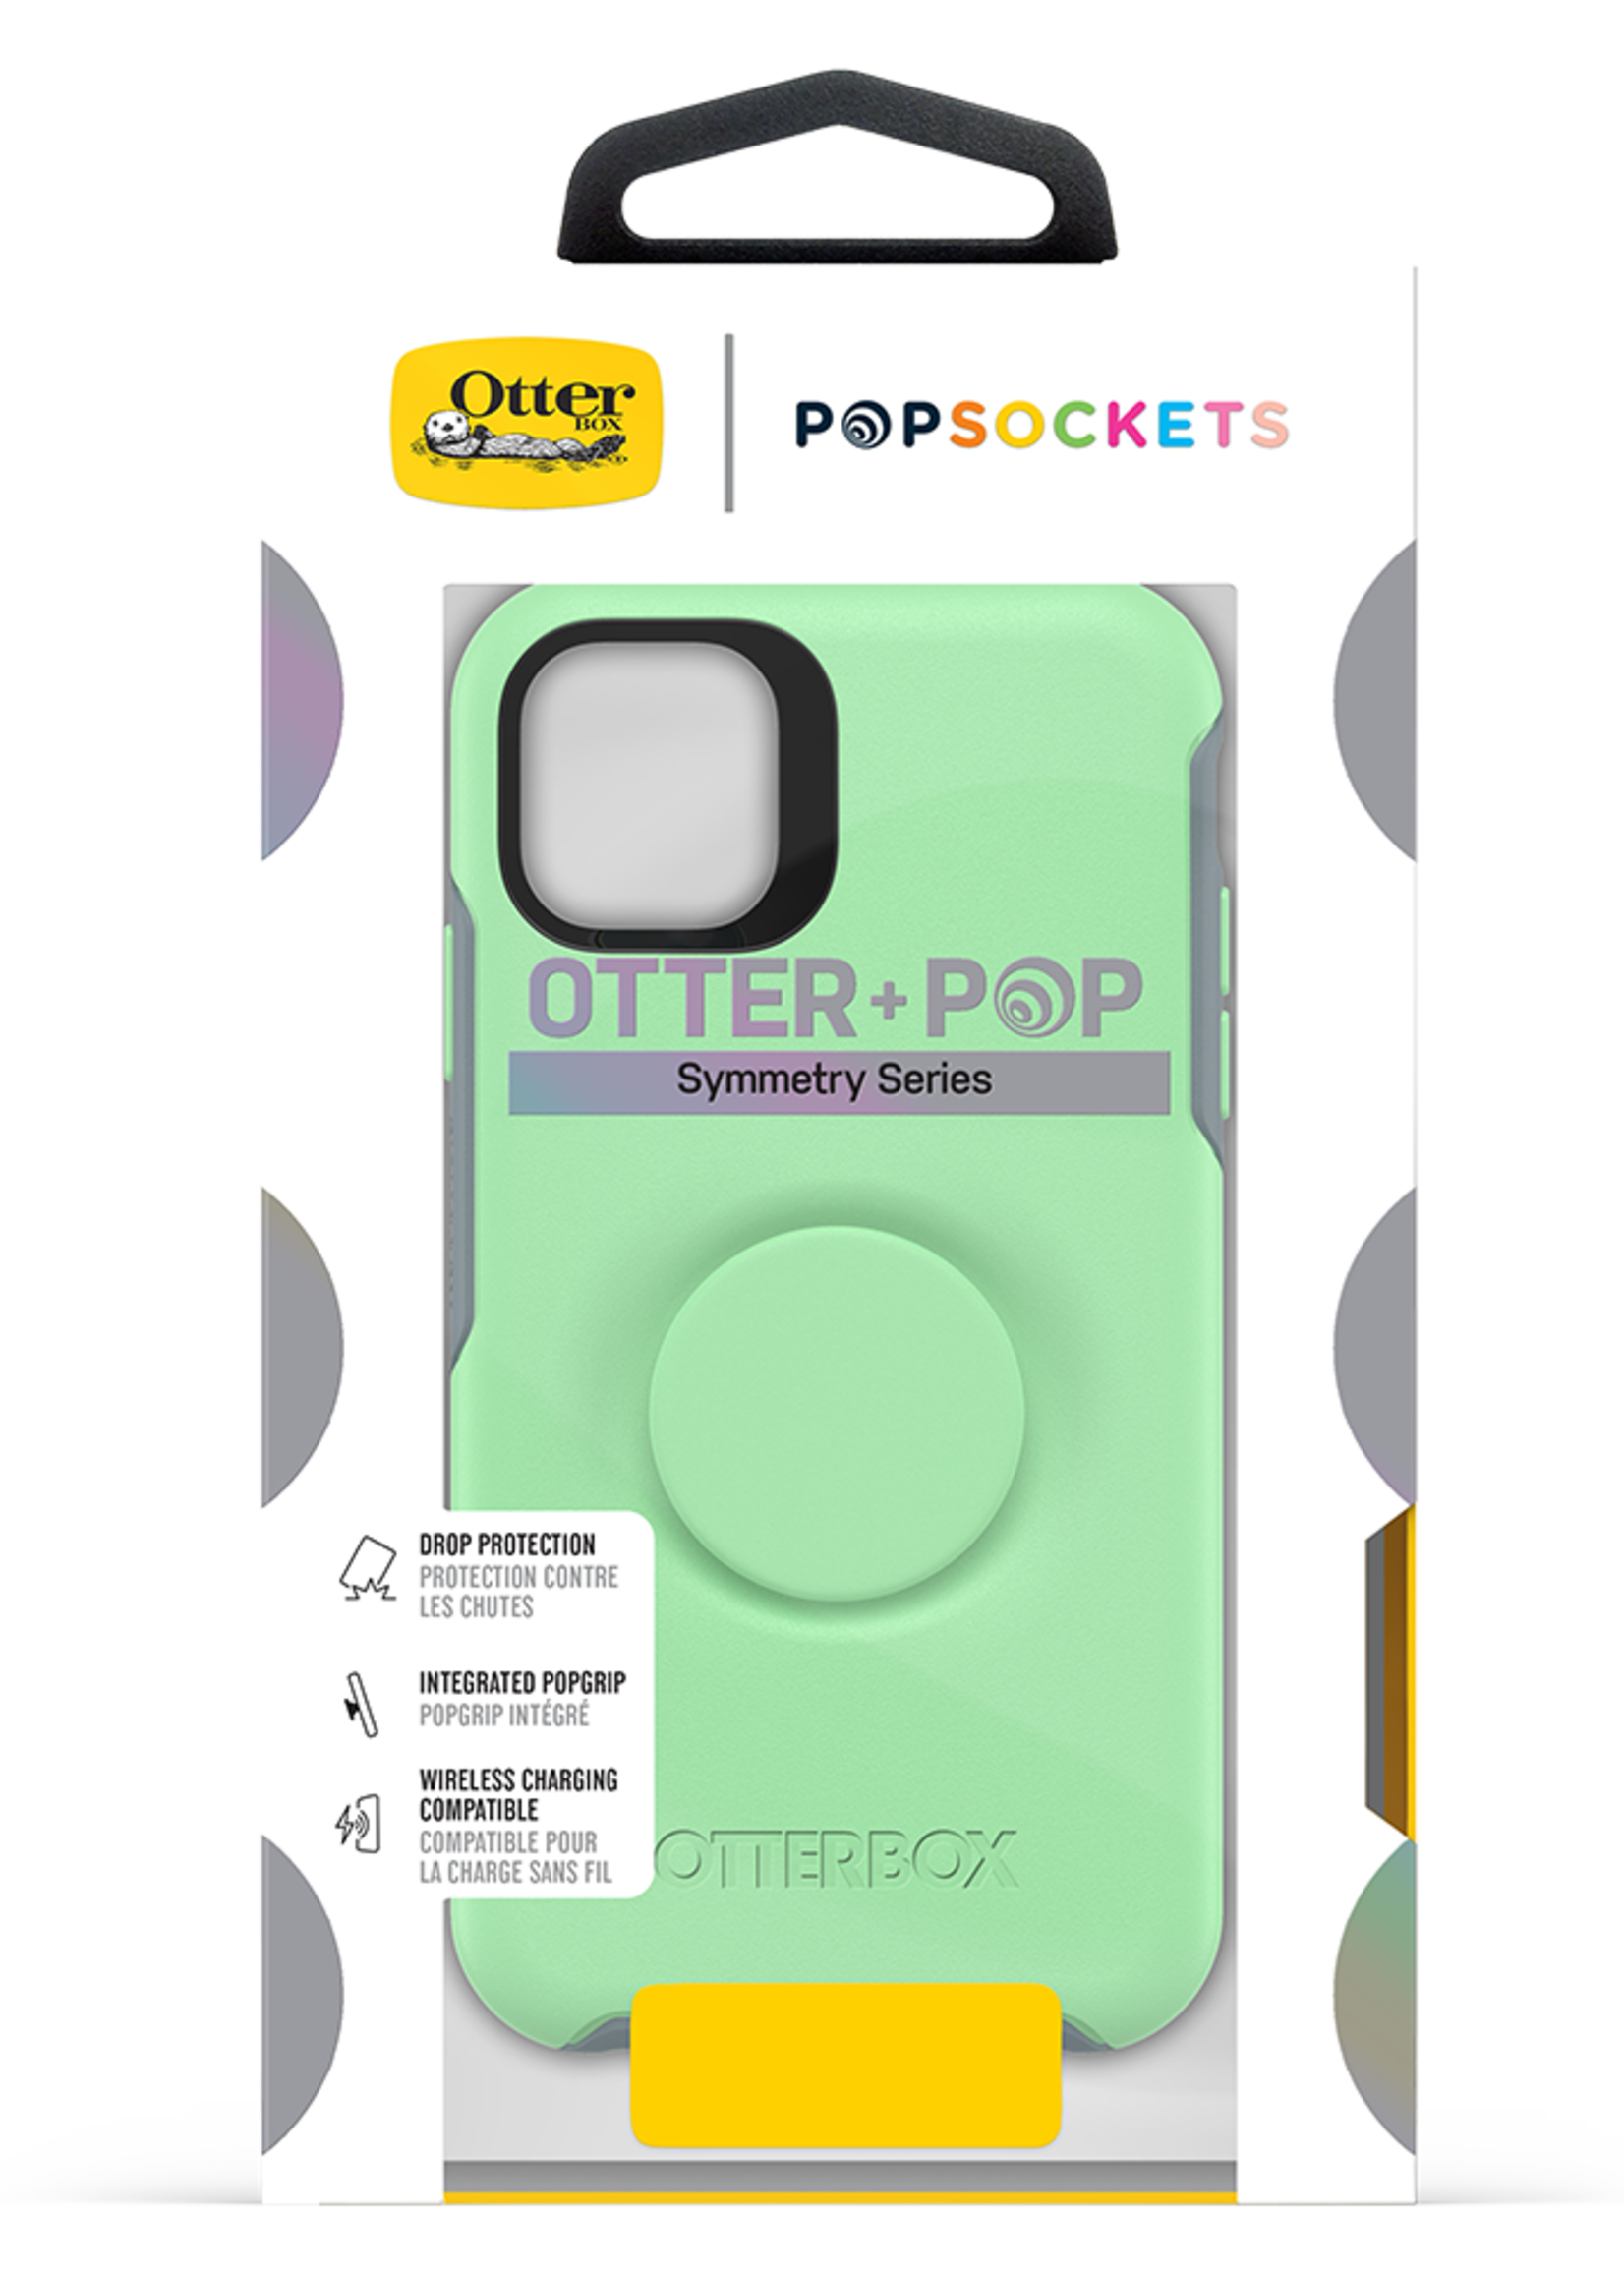 Otterbox OtterBox - Otter + Pop Symmetry Case with PopGrip for Apple iPhone 11 - Mint to Be